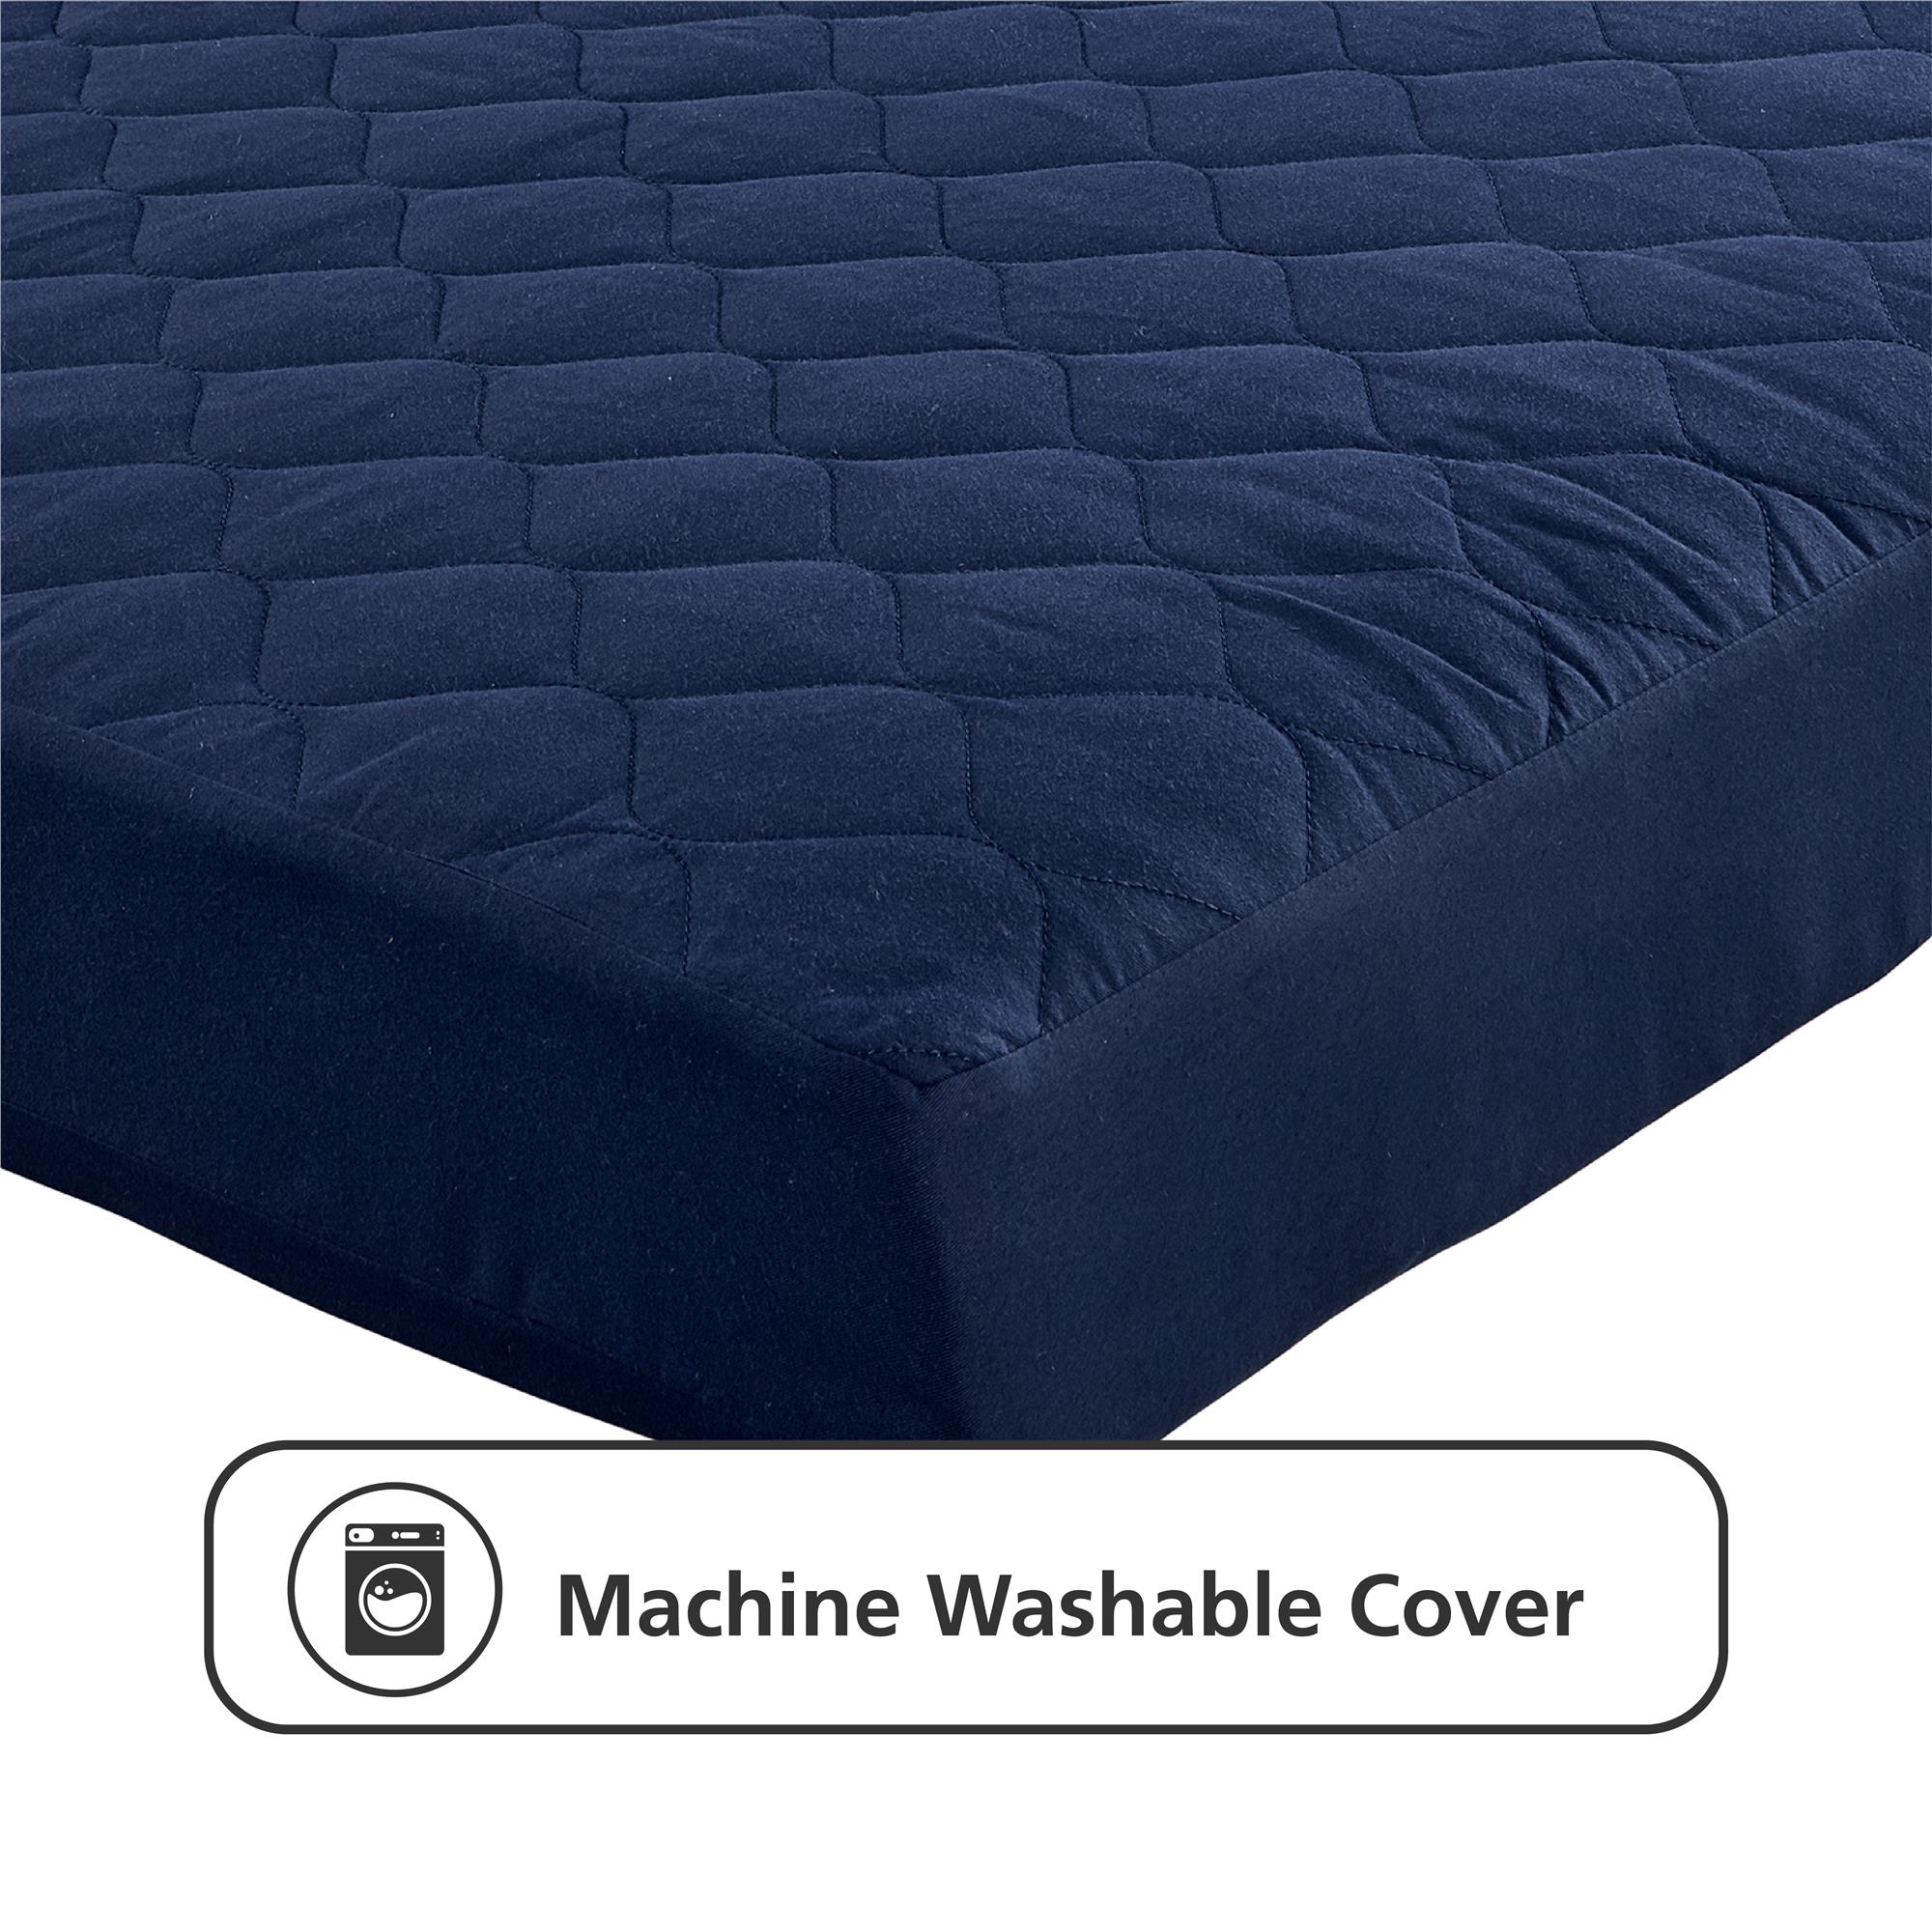 DHP Value 6 Inch Thermobonded Polyester Filled Quilted Top Bunk Bed Mattress, Full, Navy - image 5 of 12